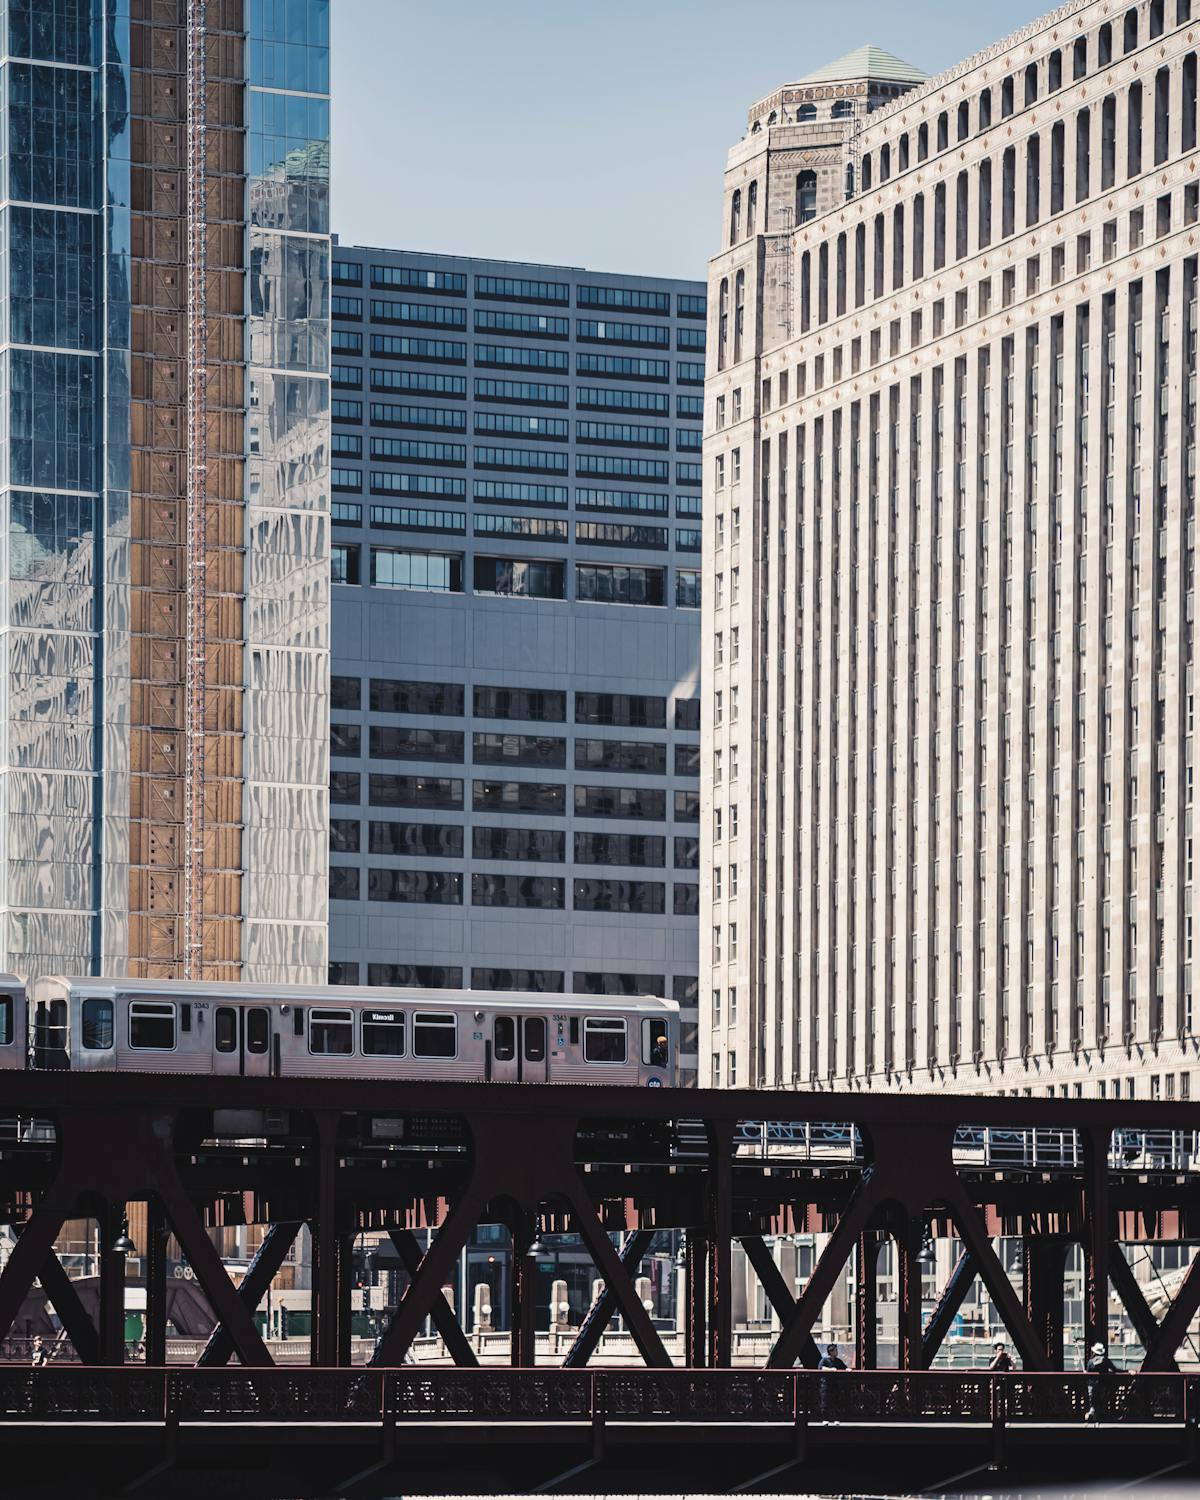 Railroad Beside Tall Buildings · Free Stock Photo